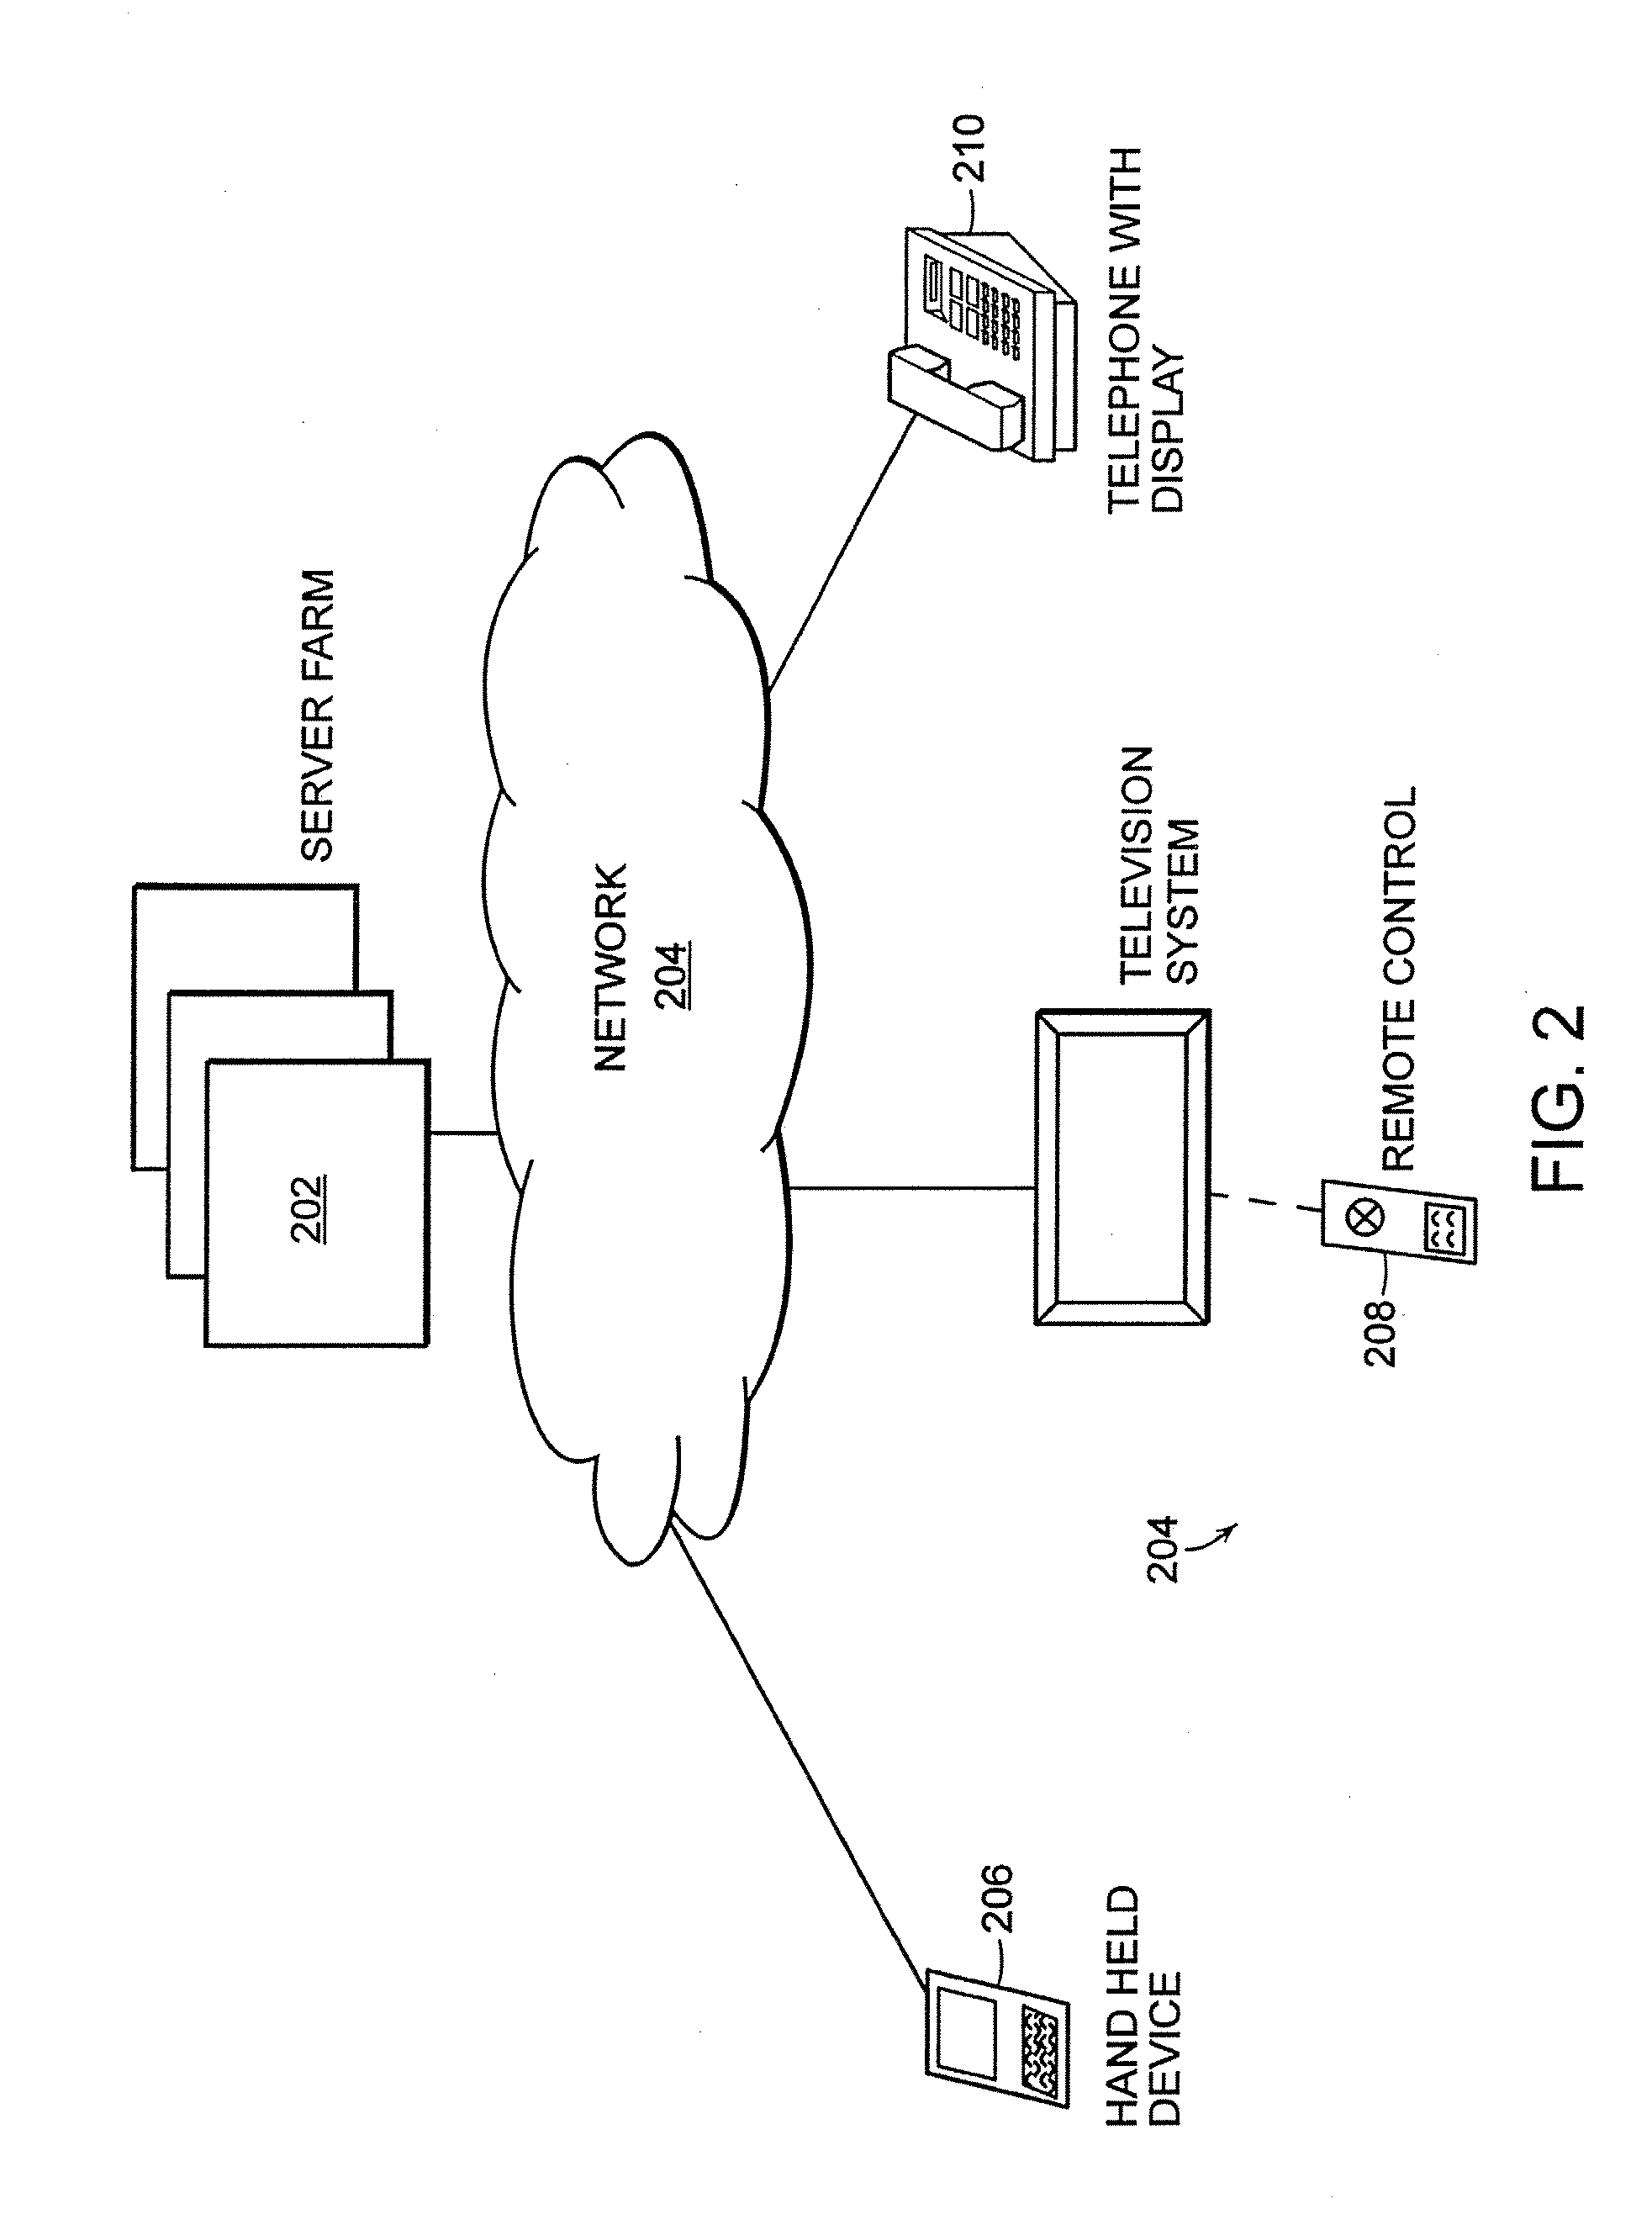 Method and system for dynamically processing ambiguous, reduced text search queries and highlighting results thereof